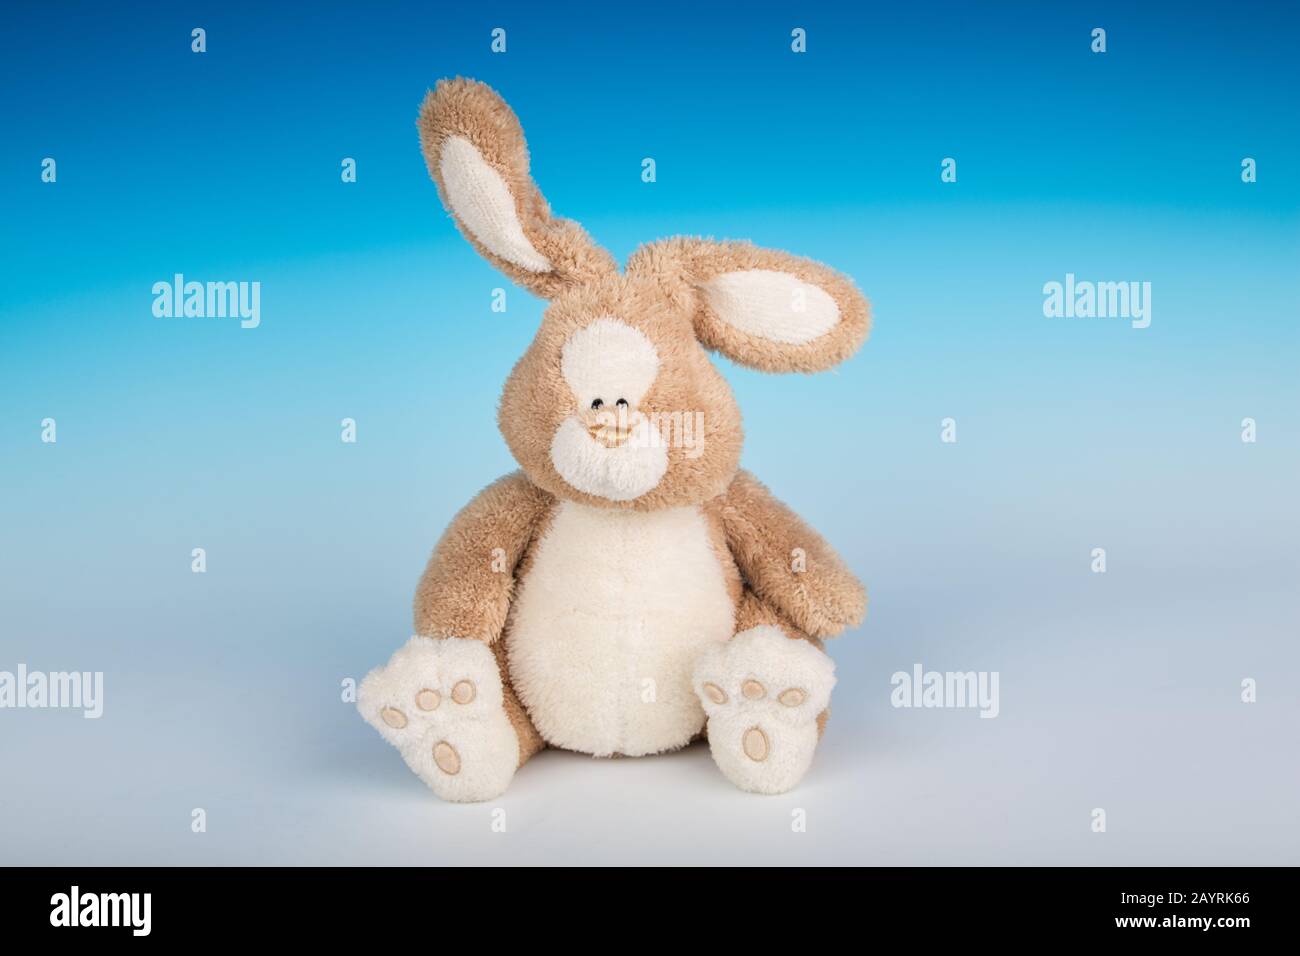 Stuffed toy bunny sitting on a gradient seamless background Stock Photo